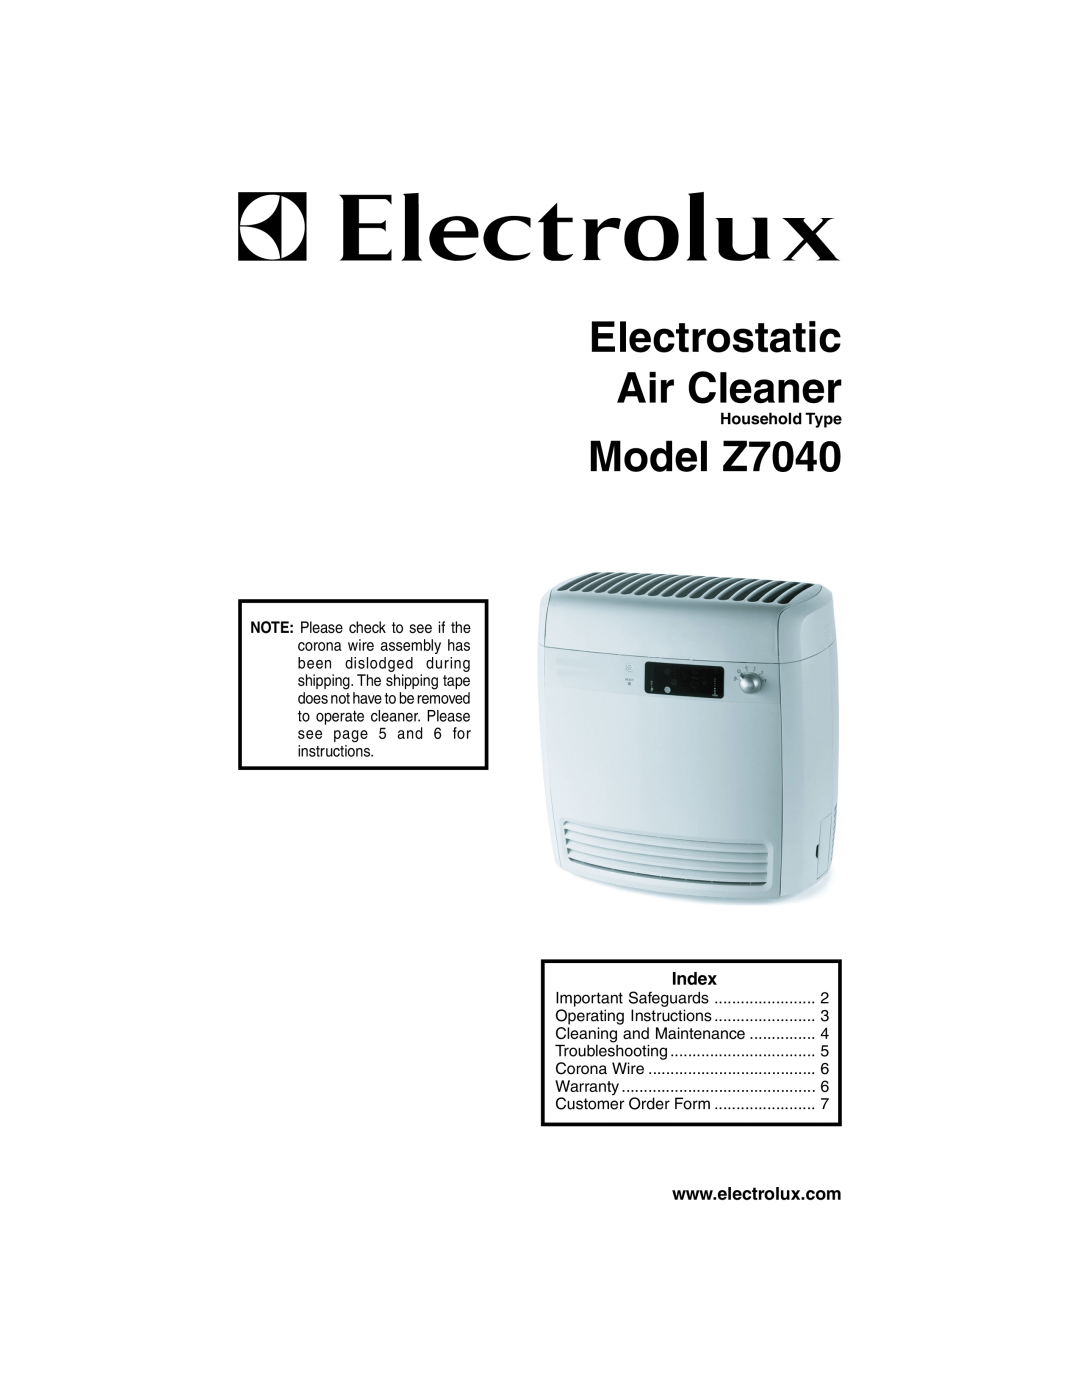 Electrolux operating instructions Index, Electrostatic Air Cleaner, Model Z7040 